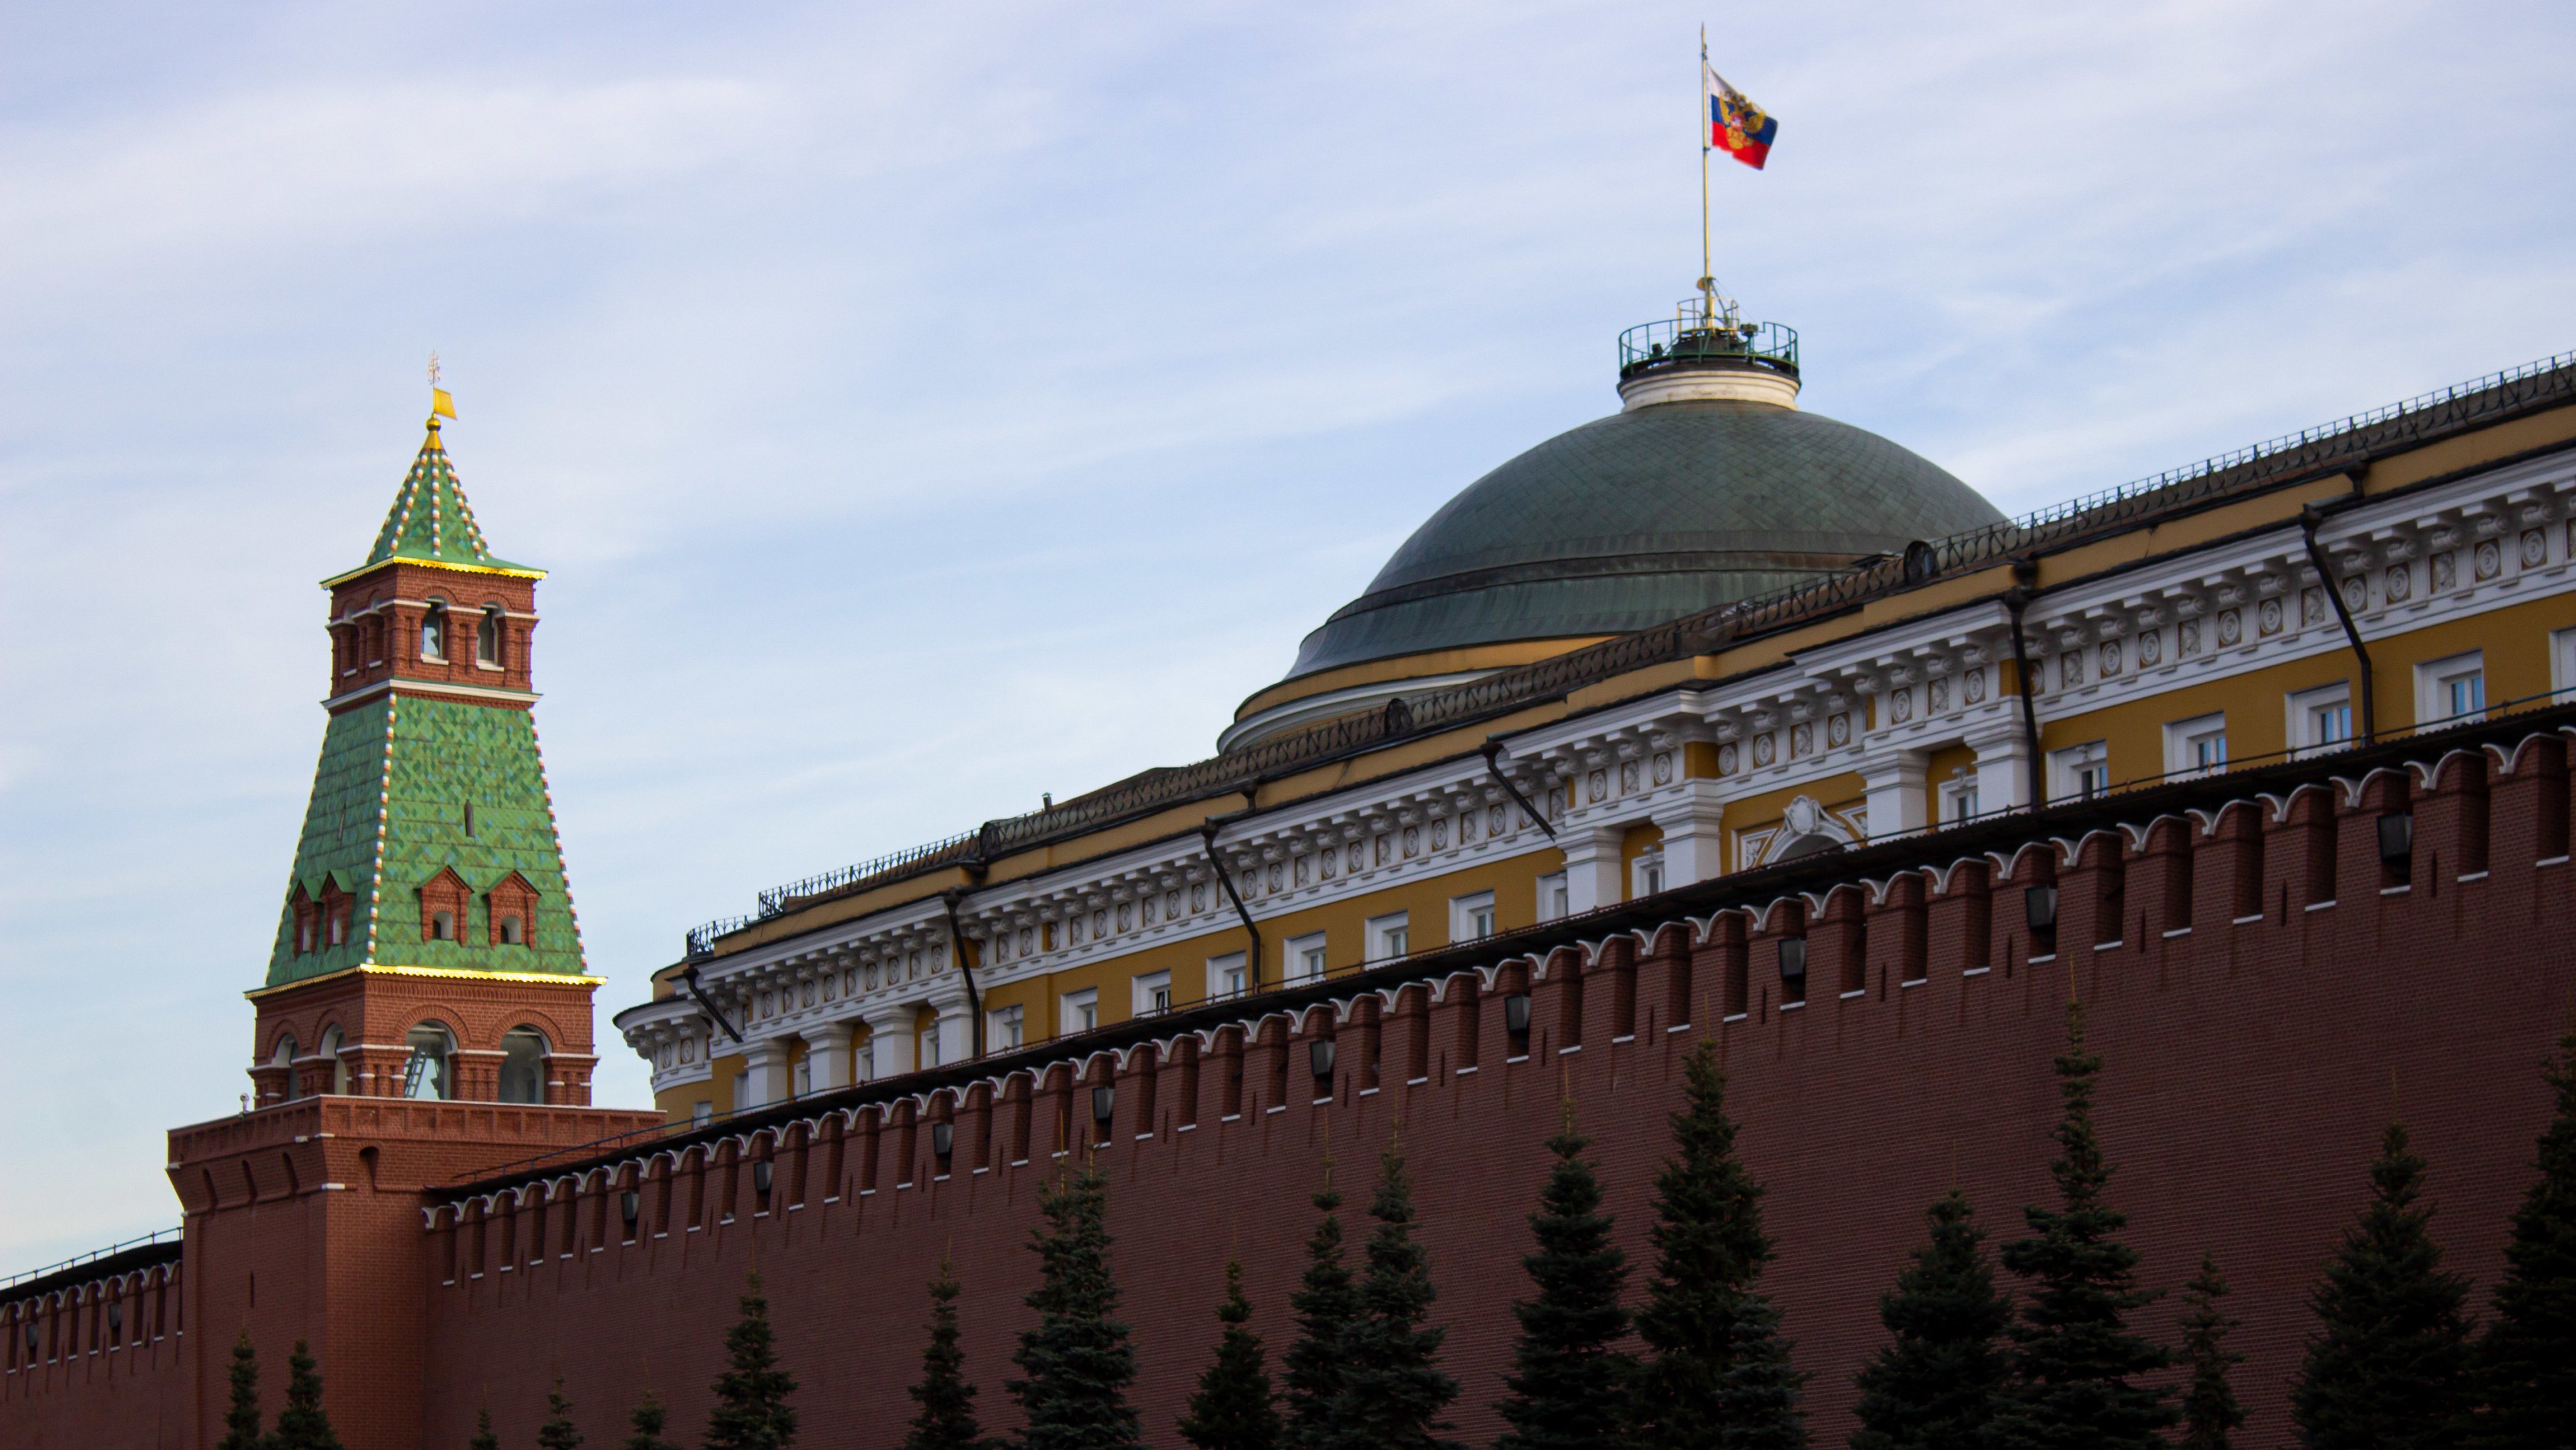 The Russian tricolor flag is seen on top of the Kremlin